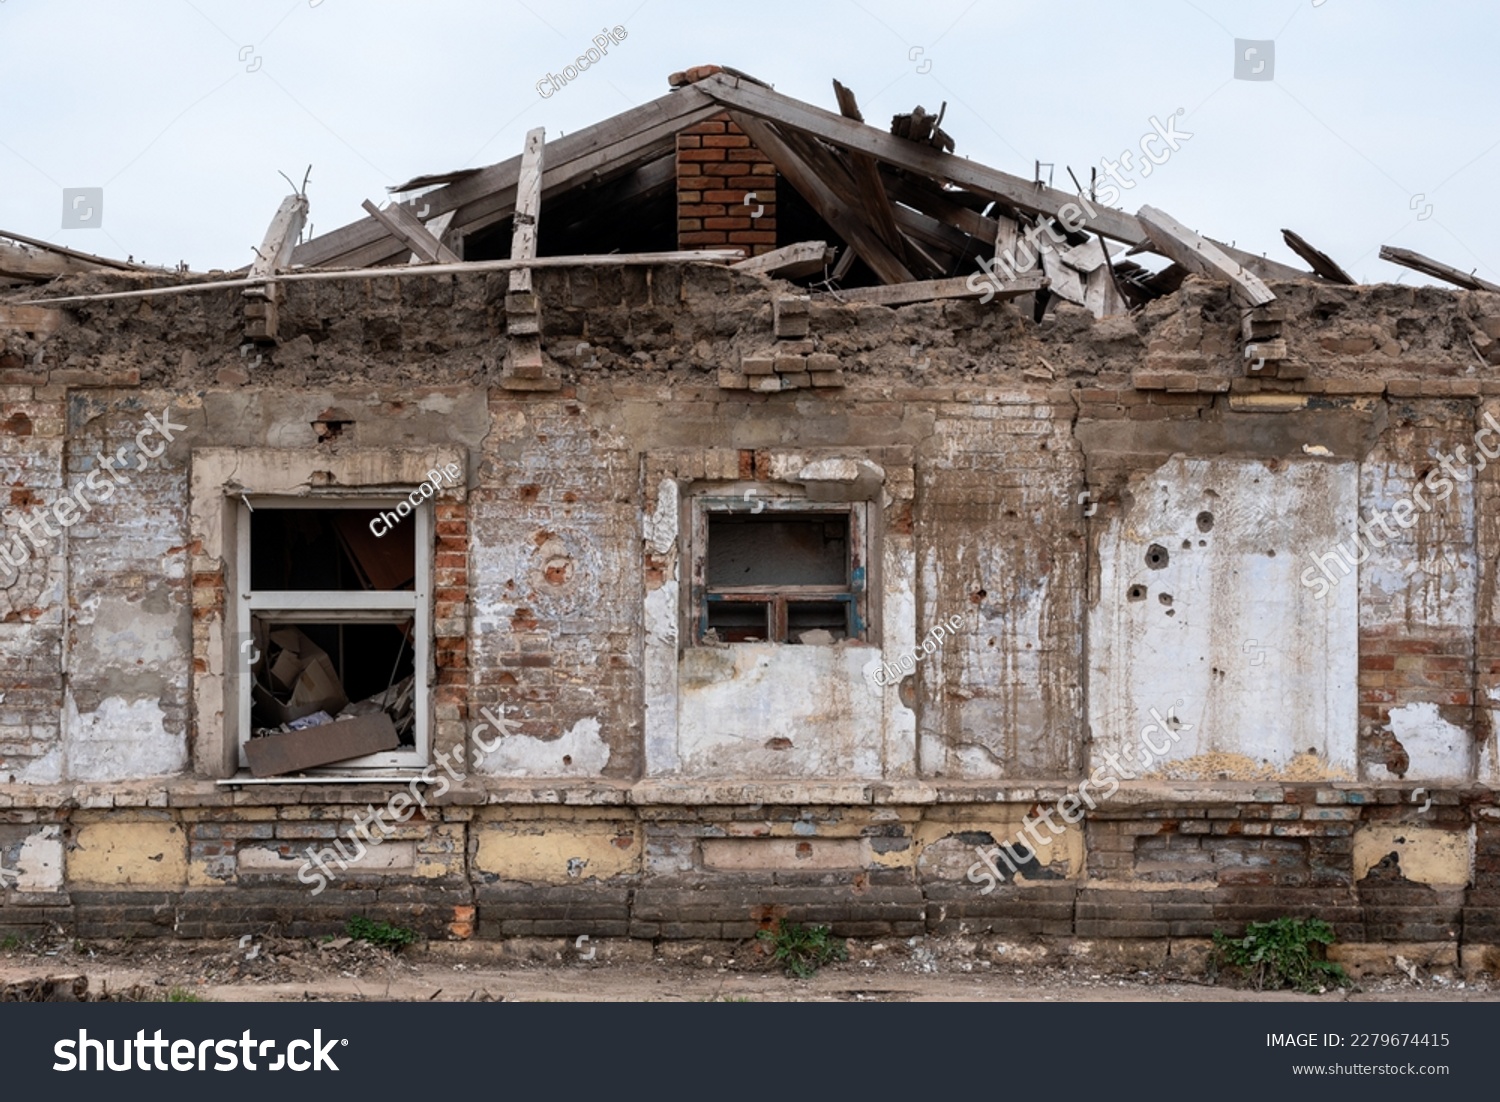 destroyed and burned houses in the city during the war in Ukraine #2279674415